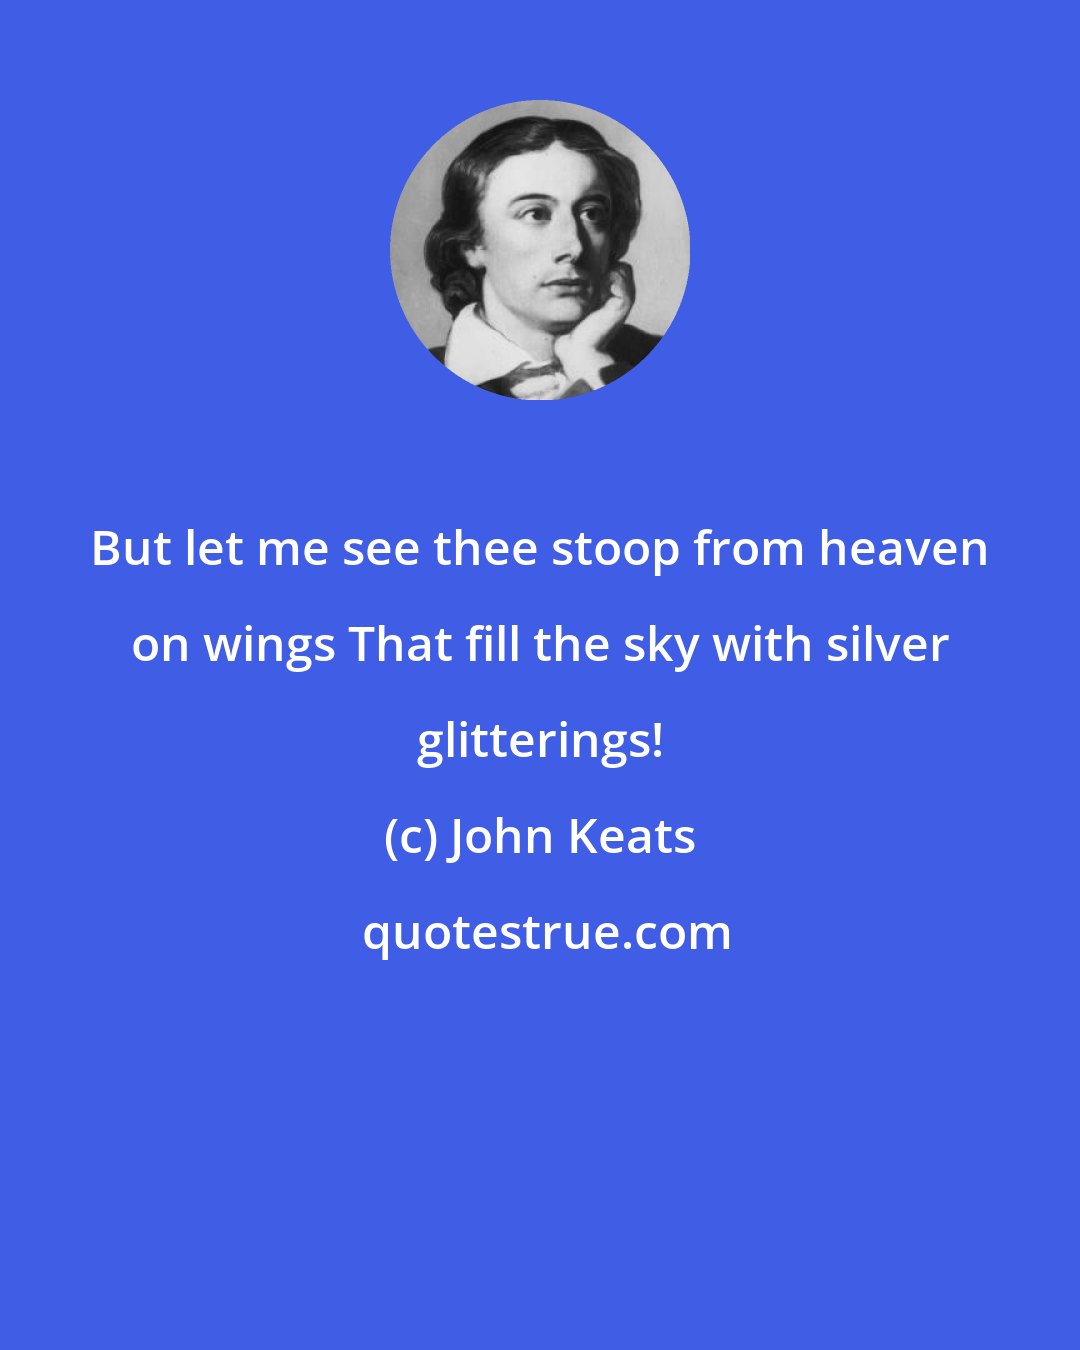 John Keats: But let me see thee stoop from heaven on wings That fill the sky with silver glitterings!